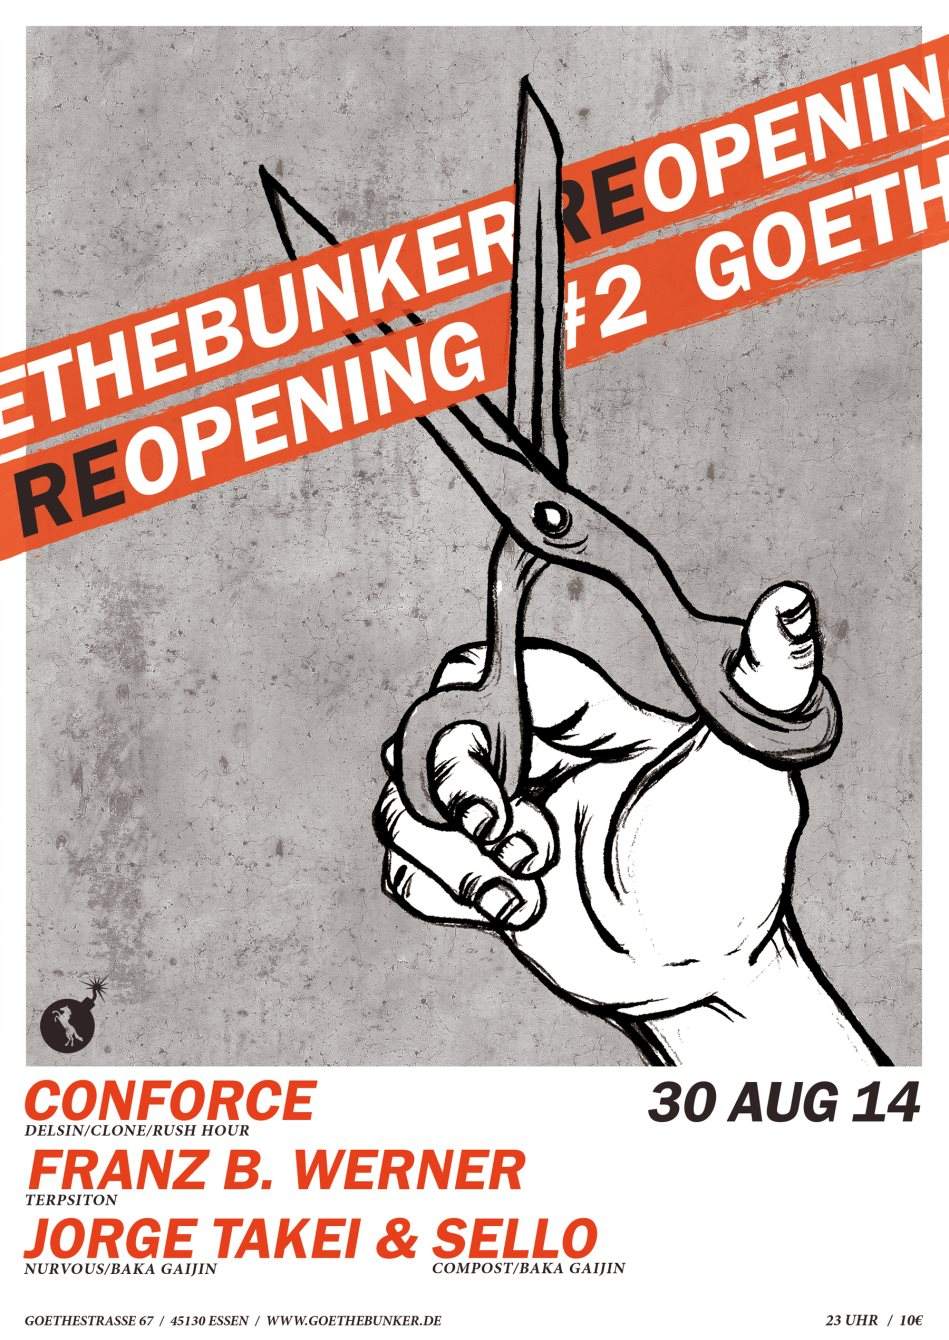 Goethebunker Reopening with Conforce, Franz B. Werner, Jorge Takei & Sello - フライヤー表